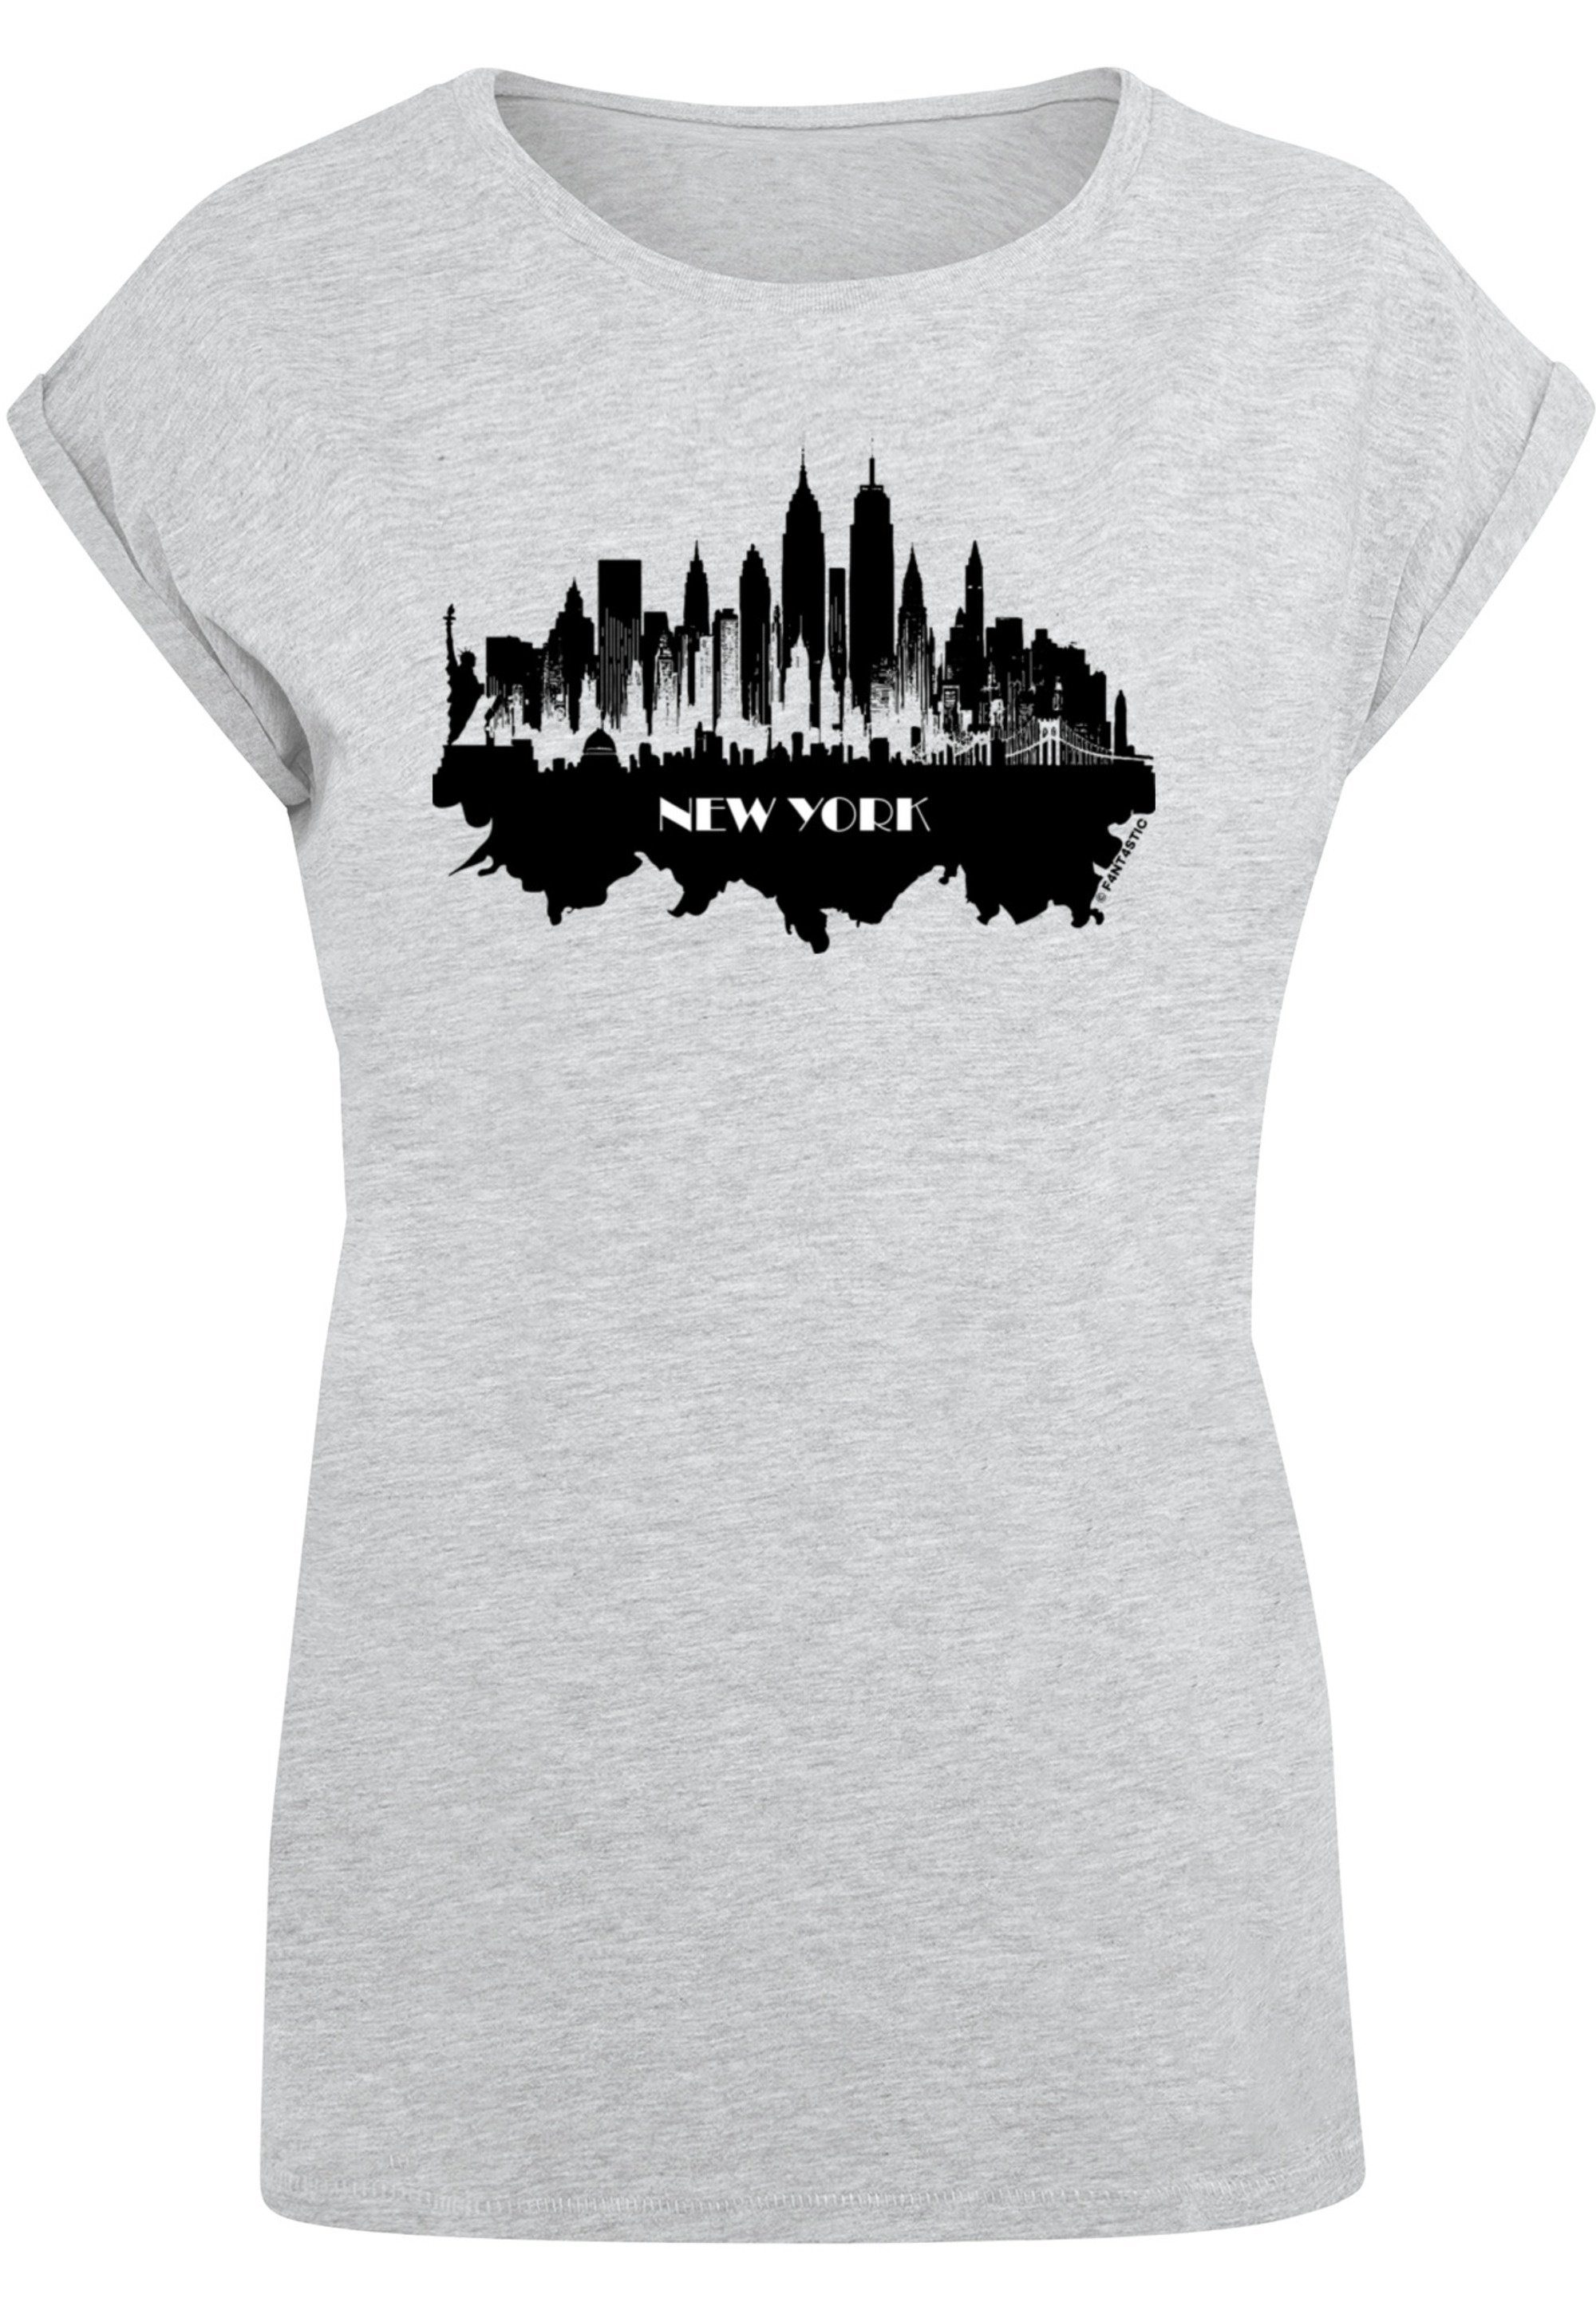 Cities Collection T-Shirt - skyline grey New Print F4NT4STIC heather York